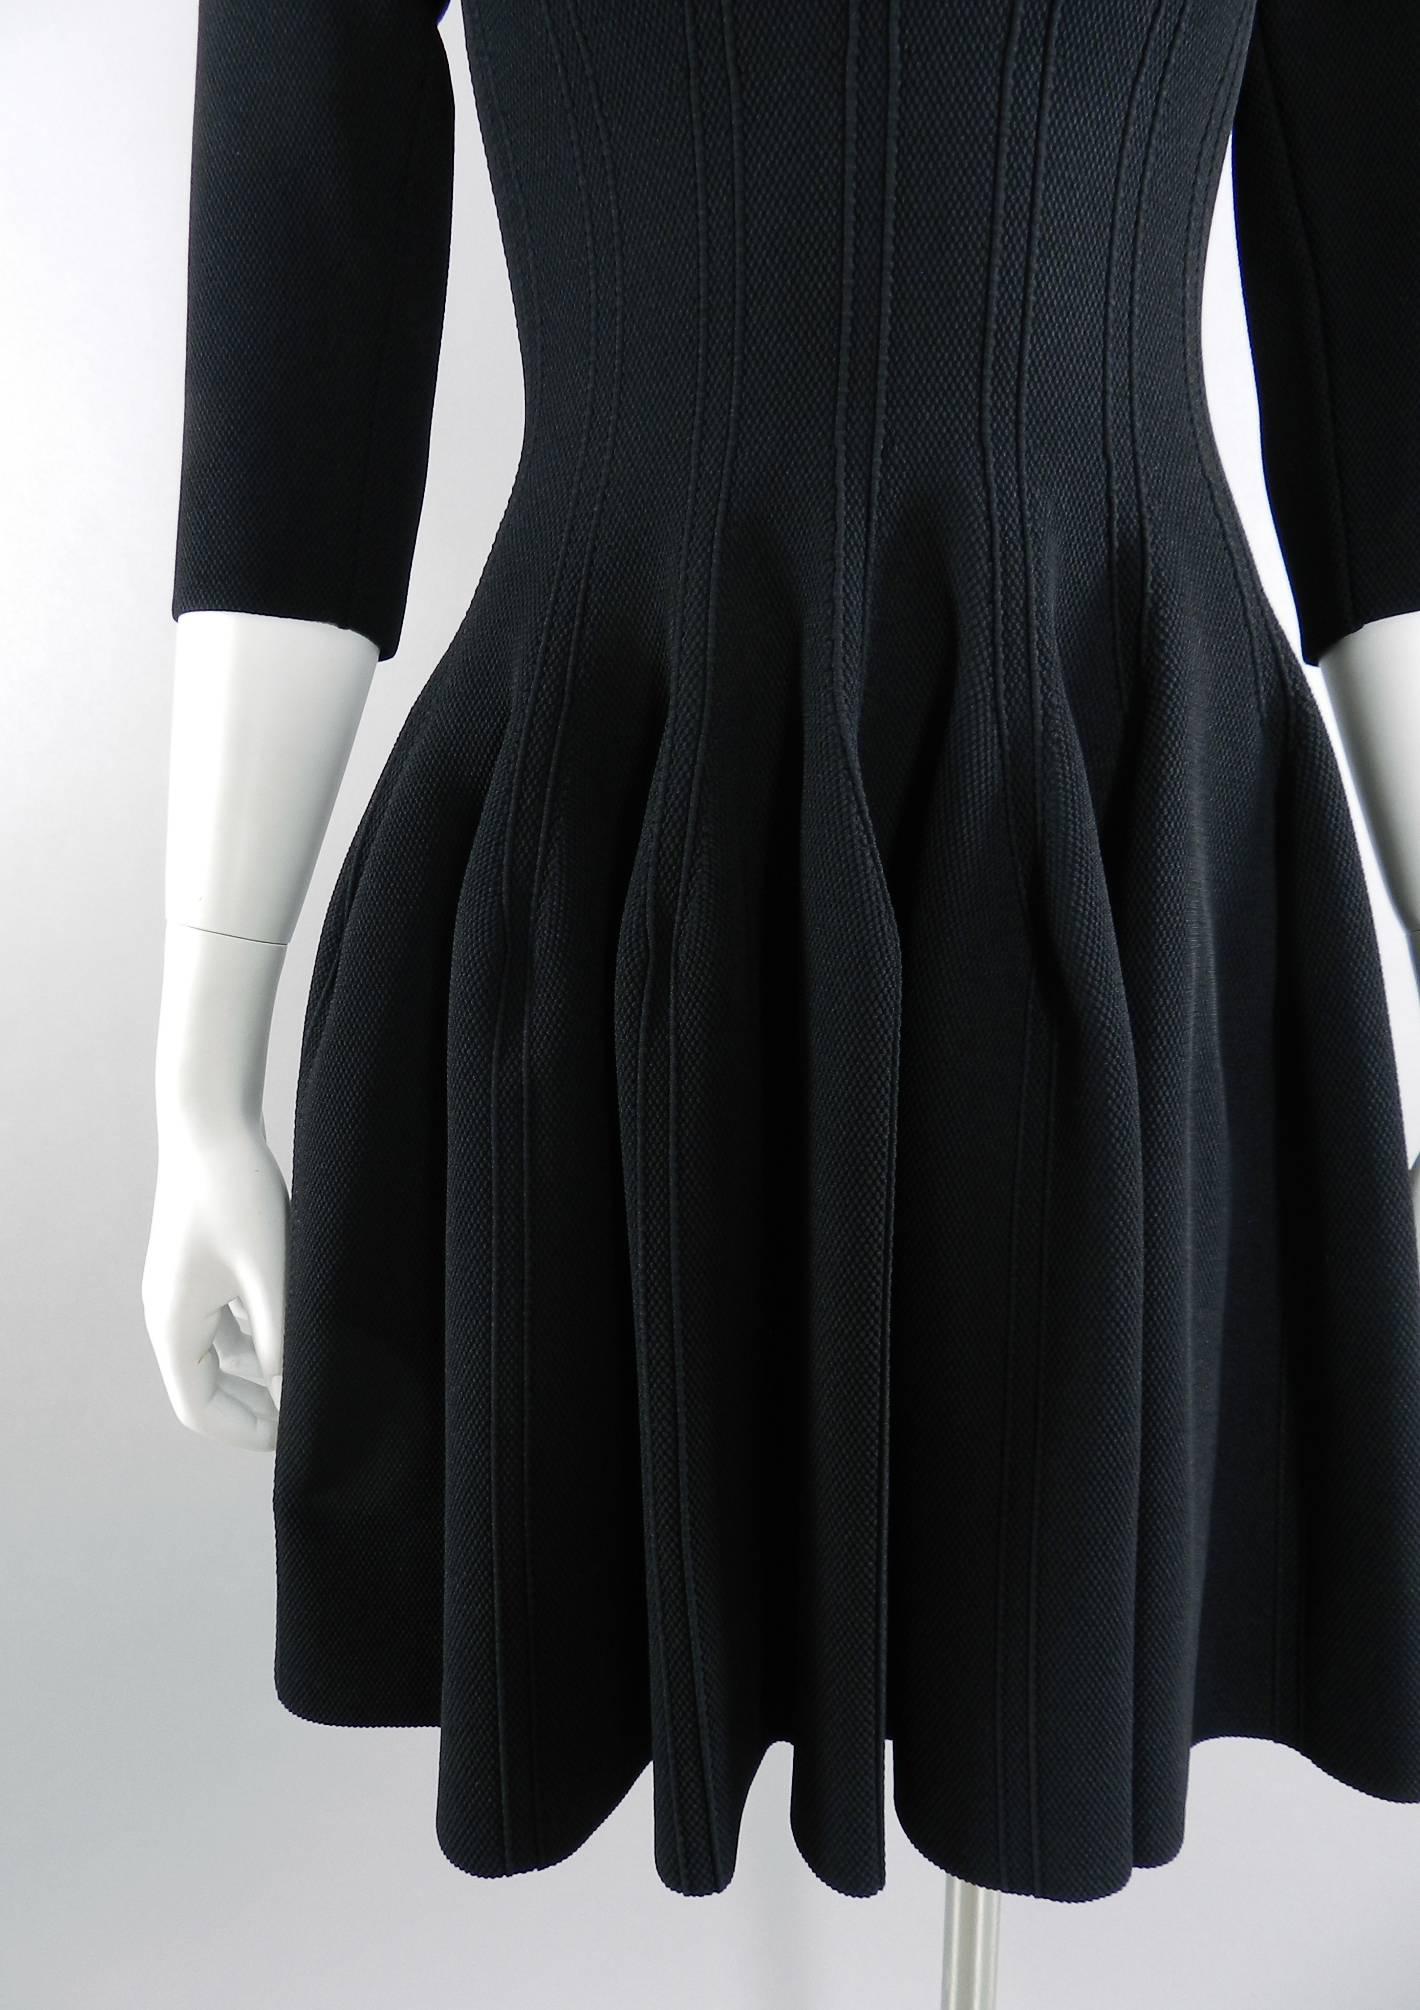 Alaia Black Fit and Flare Skater Dress.  Stretch knit jersey fabric with 3/4 length sleeves, fitted bodice, and full skirt. Tagged size FR 40 but Alaia runs small and this is best for USA size 4/6 (size S). Will fit 34" at bust, 24" waist